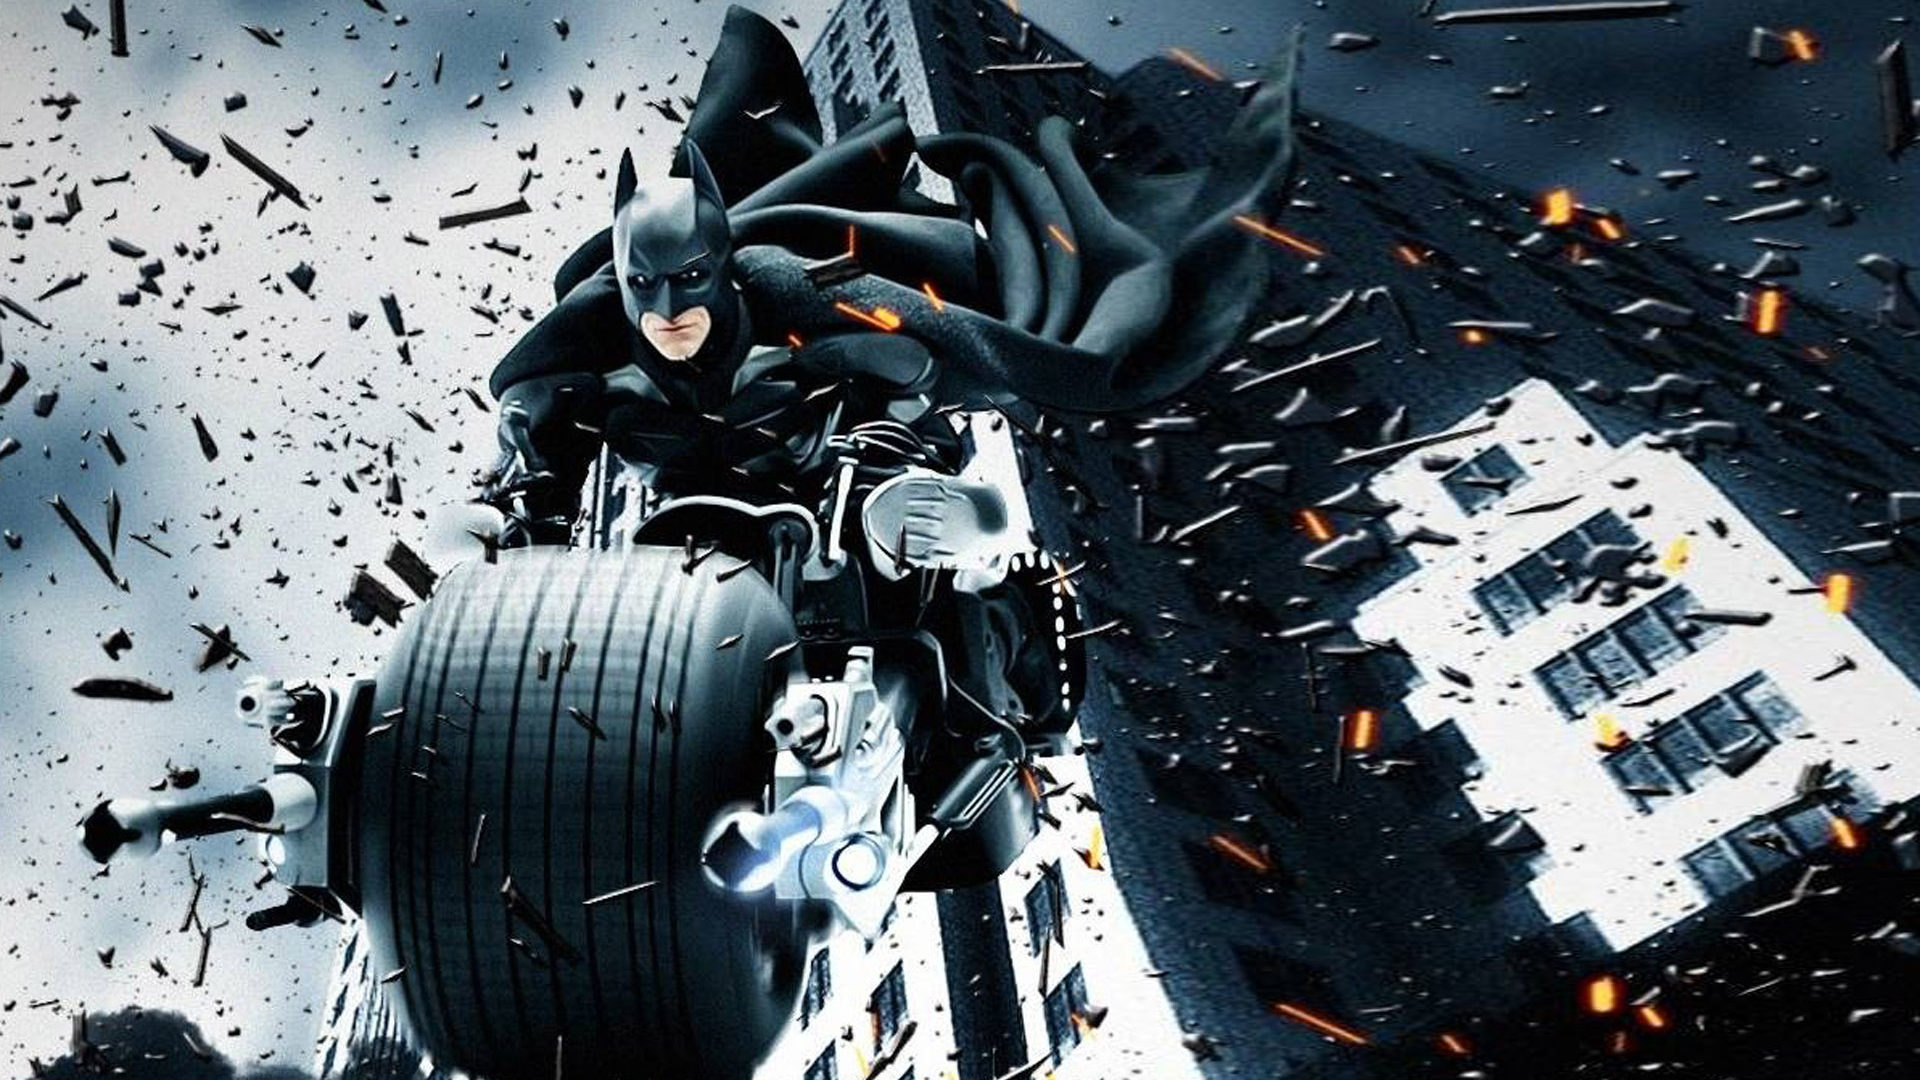 Batman images the dark knight movie hd wallpapers for mobile phones and